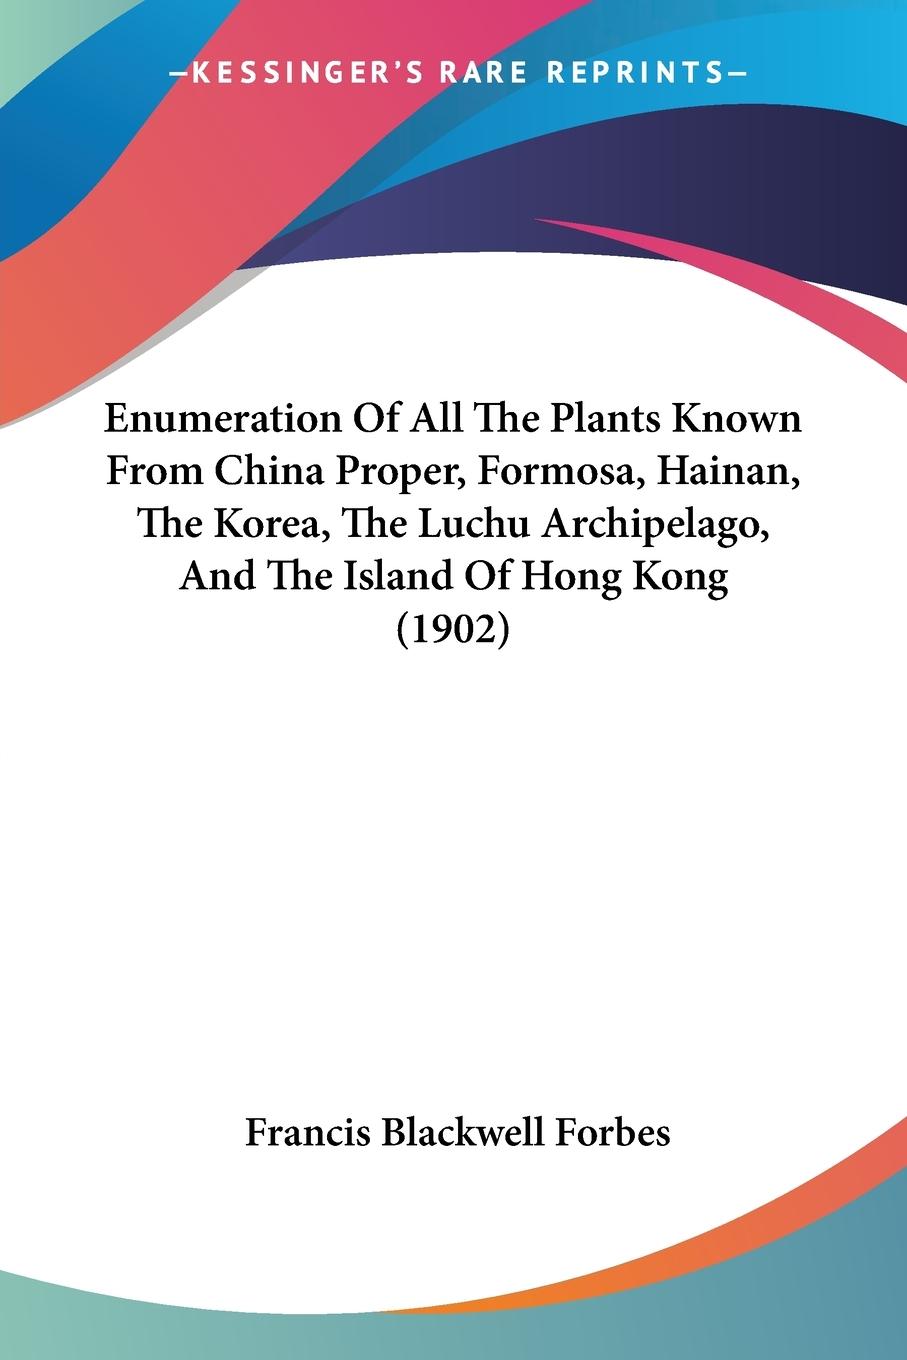 Enumeration Of All The Plants Known From China Proper, Formosa, Hainan, The Korea, The Luchu Archipelago, And The Island Of Hong Kong (1902) - Forbes, Francis Blackwell